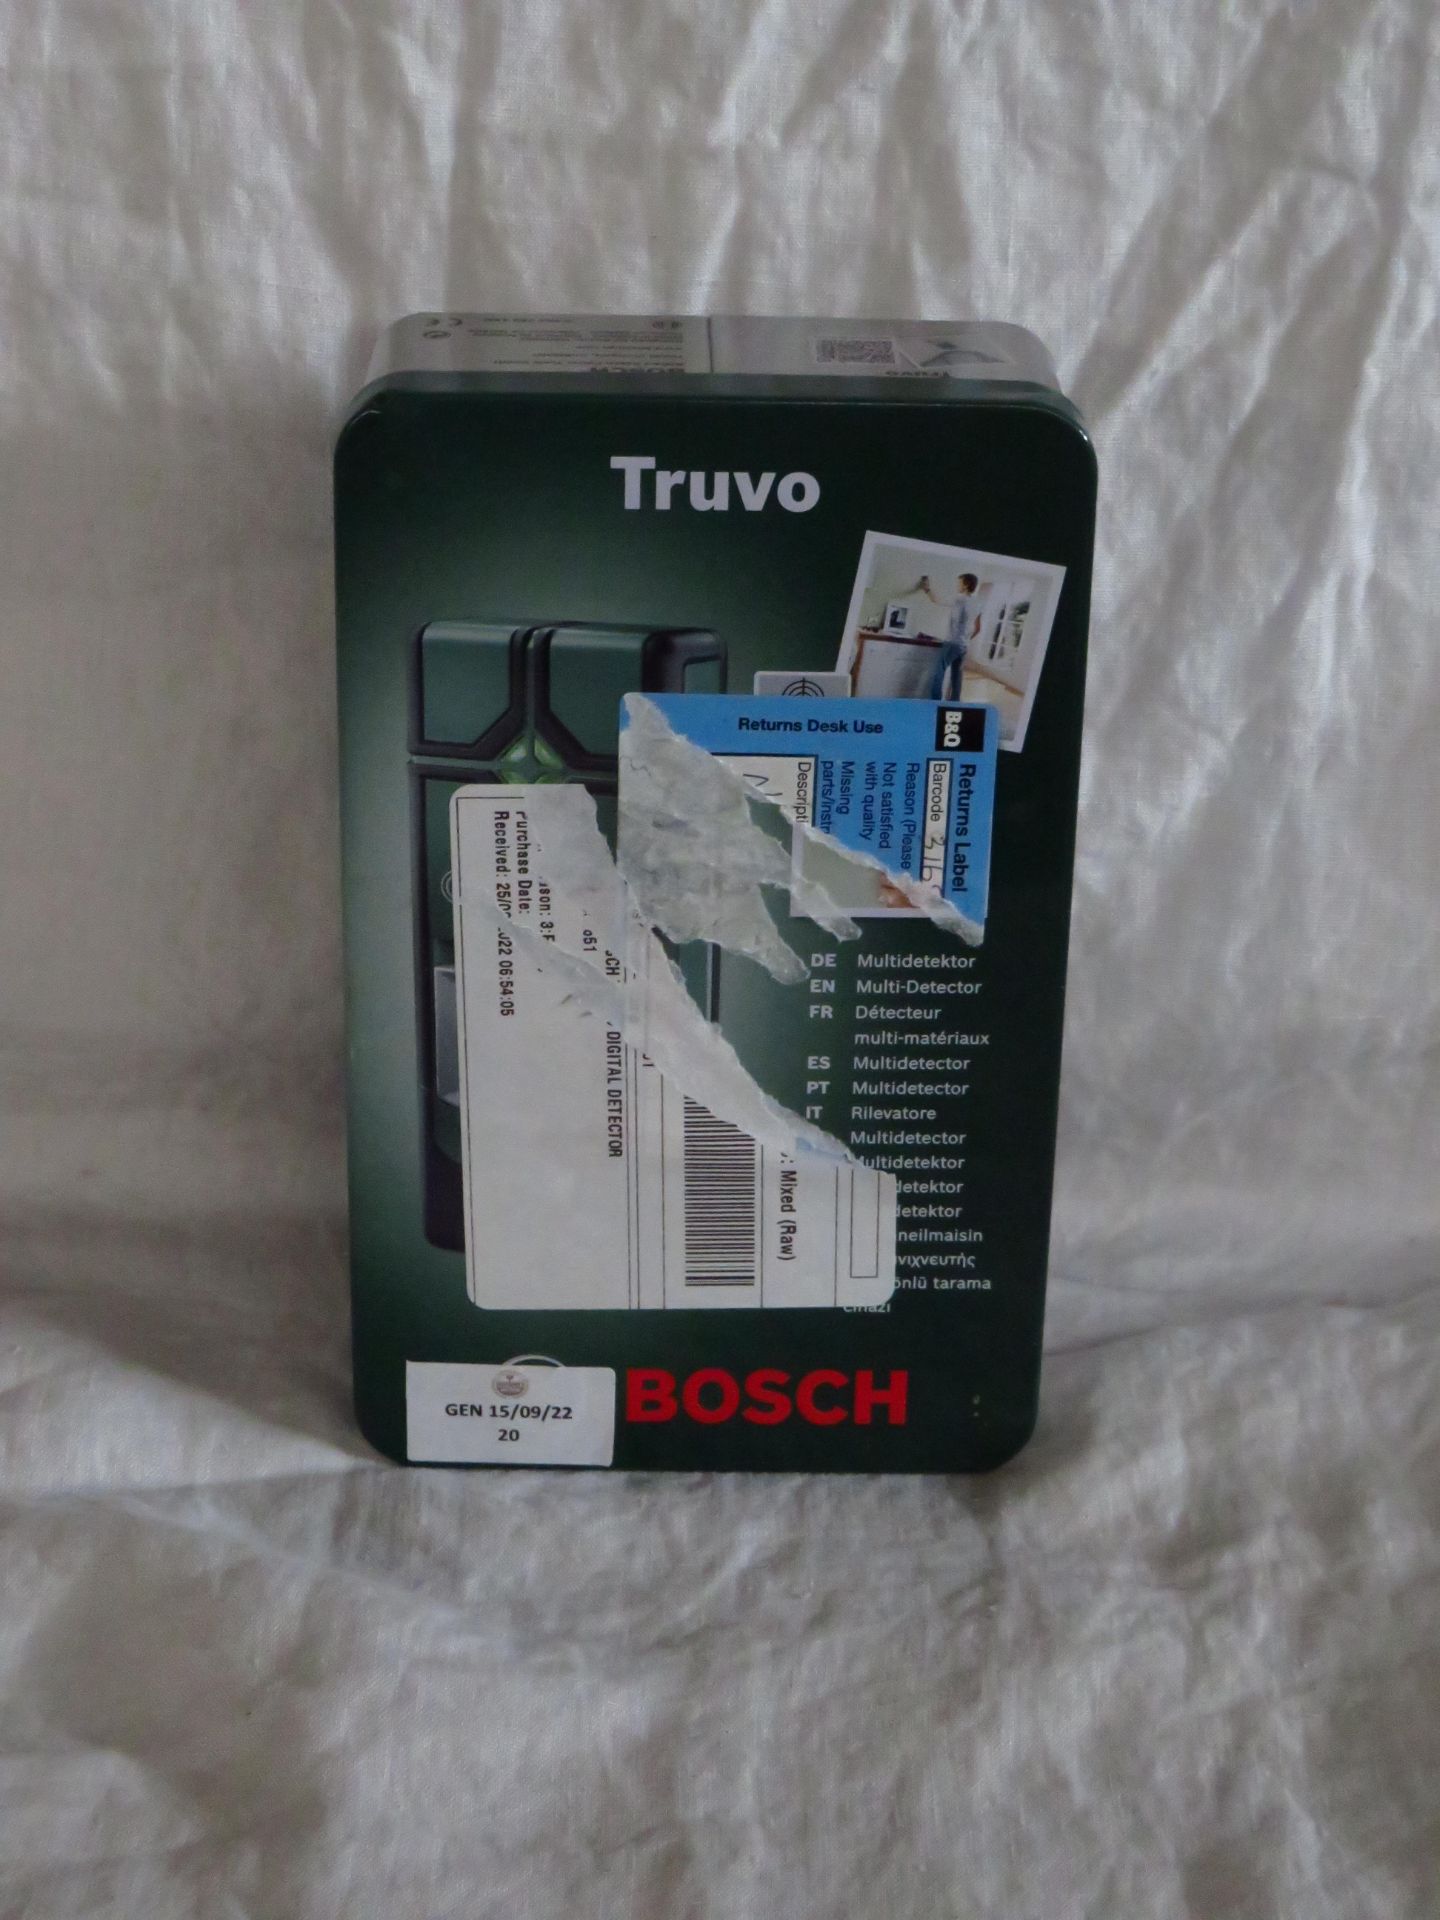 Bosch Truvo multidetector, tested working in case.